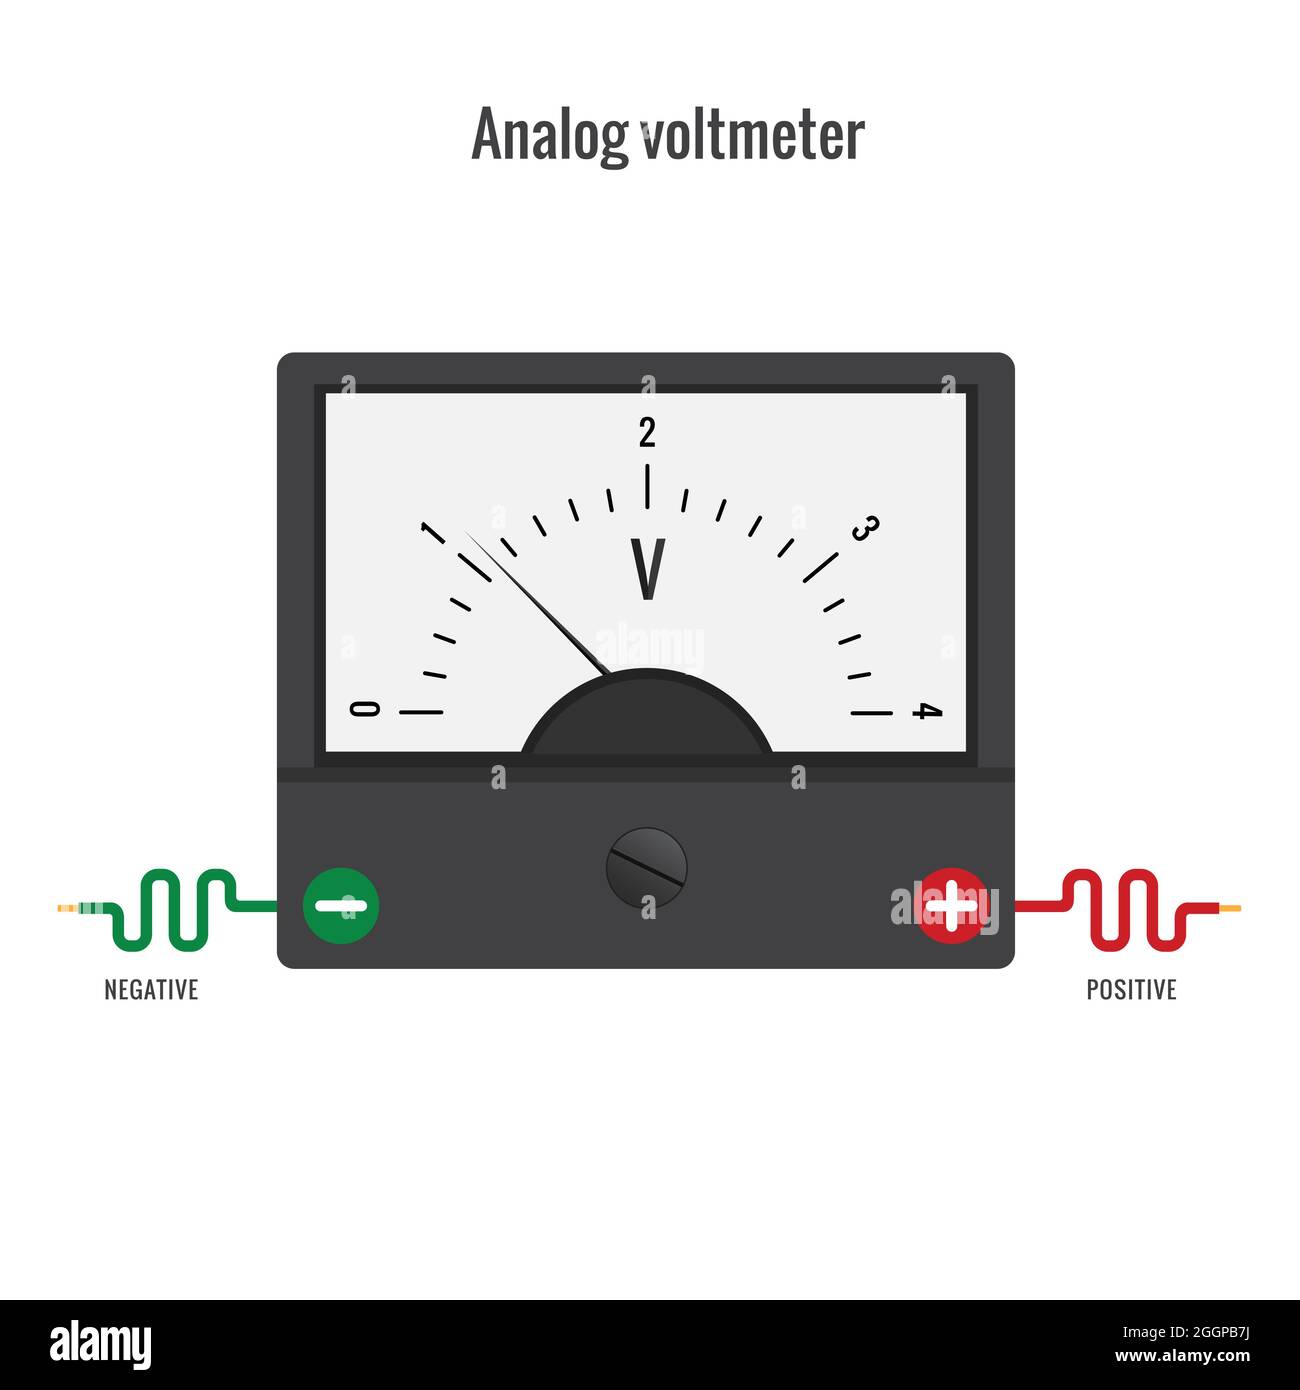 https://c8.alamy.com/comp/2GGPB7J/analog-voltmeter-the-voltmeter-is-a-physical-device-for-measuring-the-voltage-2GGPB7J.jpg